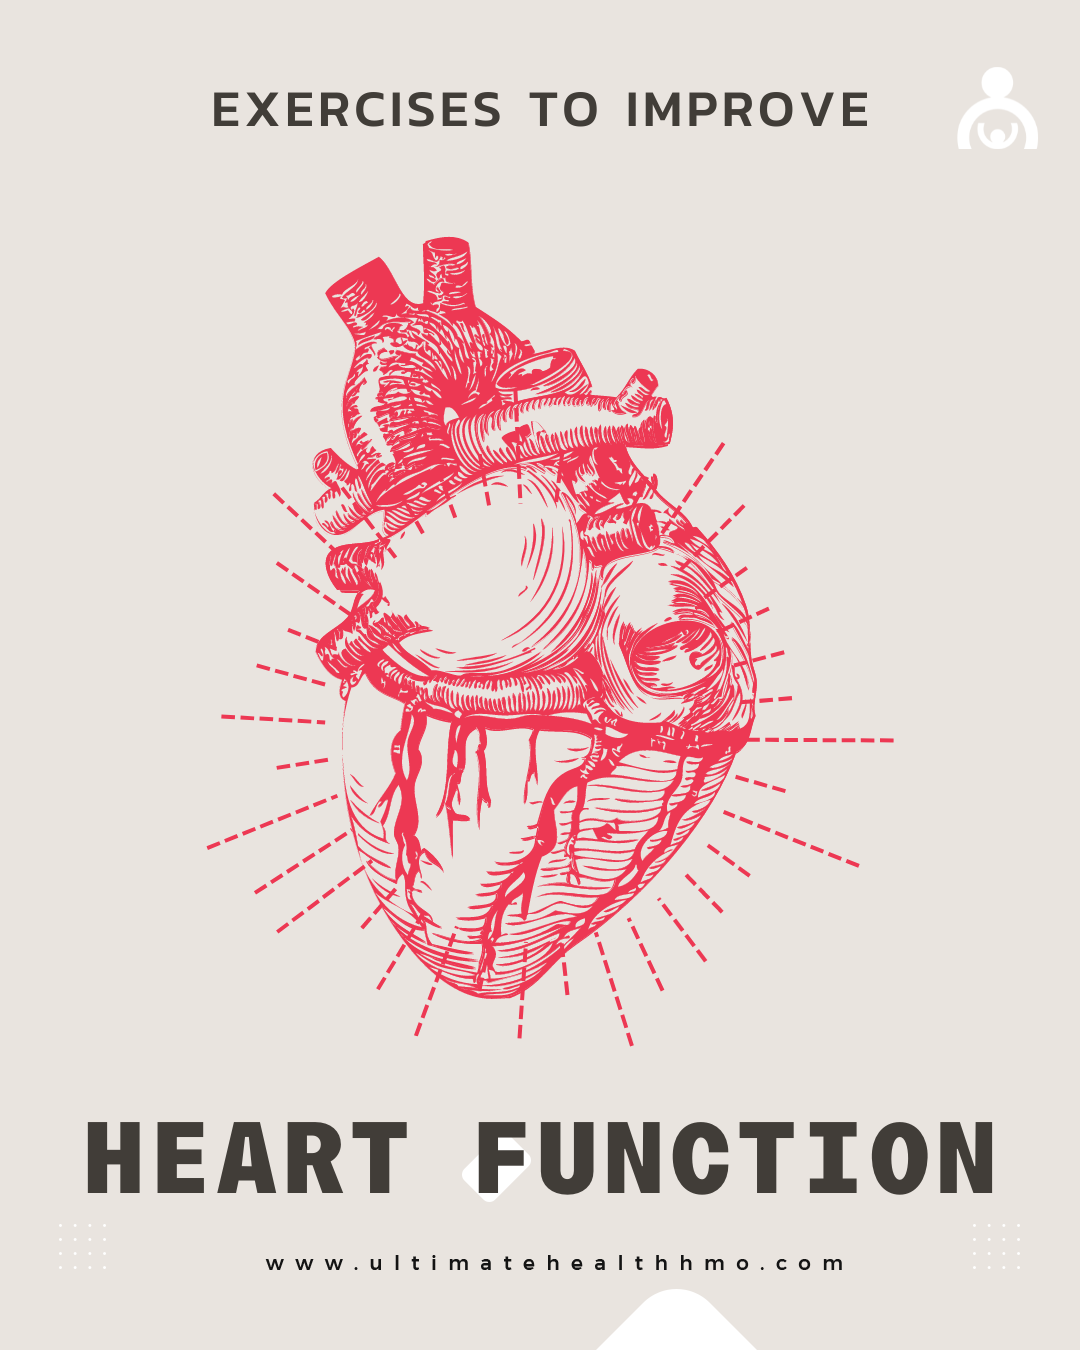 Exercises That Improve Heart Function